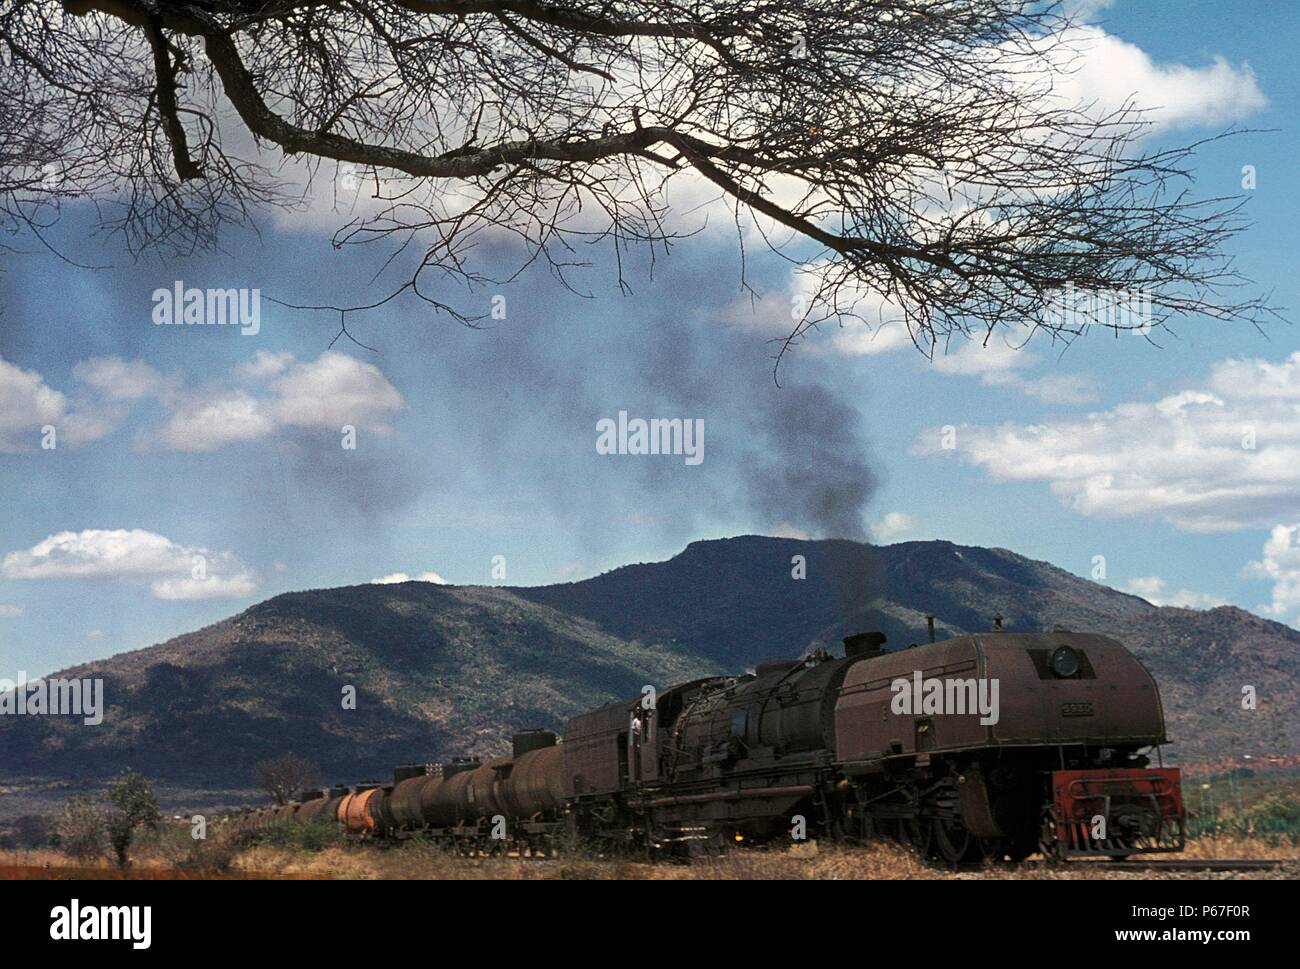 Big game at Voi. These East African Railway's Mountain Class Garratt 2-8-4 + 4-8-2 were one of the world's largest steam types. Built by Beyer Peacock Stock Photo